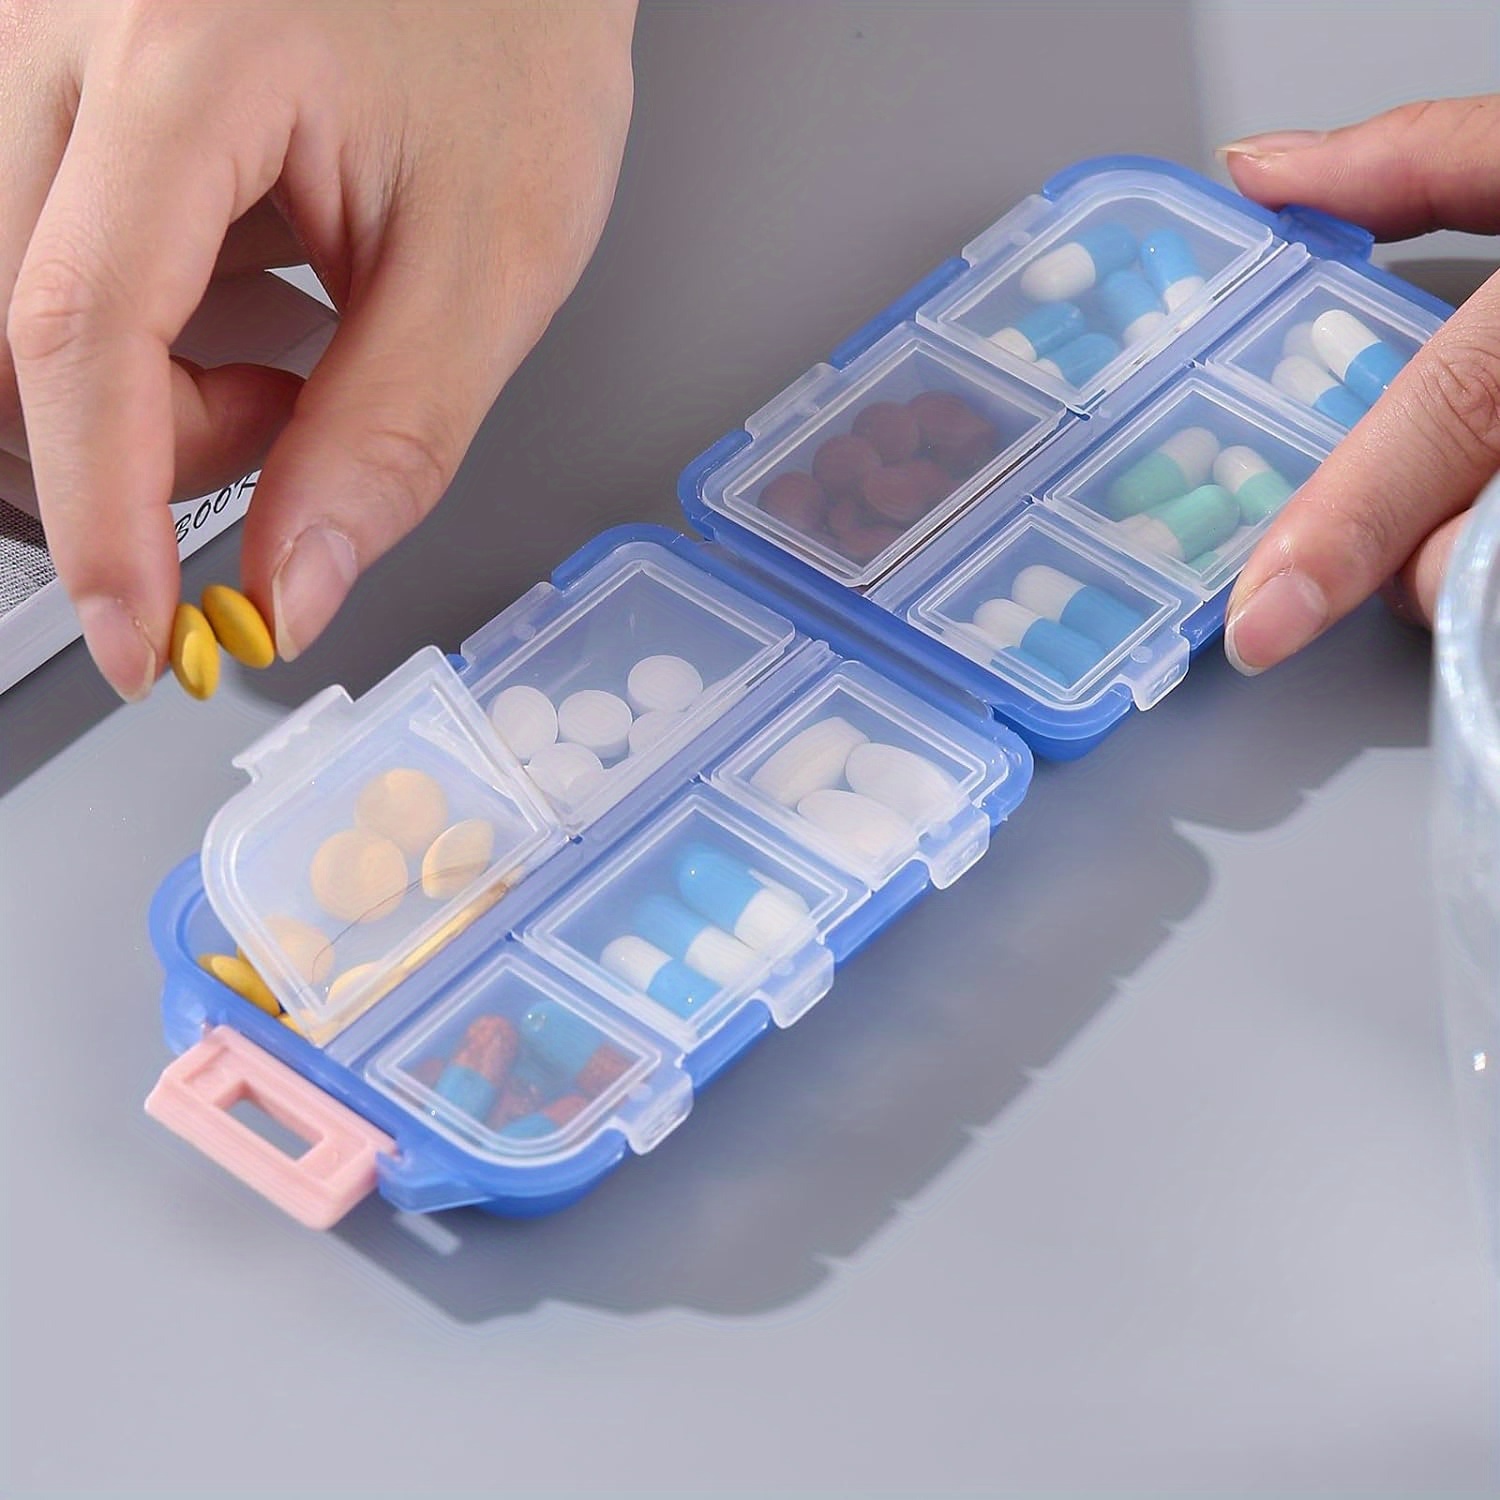 4 Pack Small Travel Pill Organizer for Purse, Pocket, Bag - 10 Compartments  Pill Holder Box, Handy Medicine Container - Portable Mini Pharmacy for